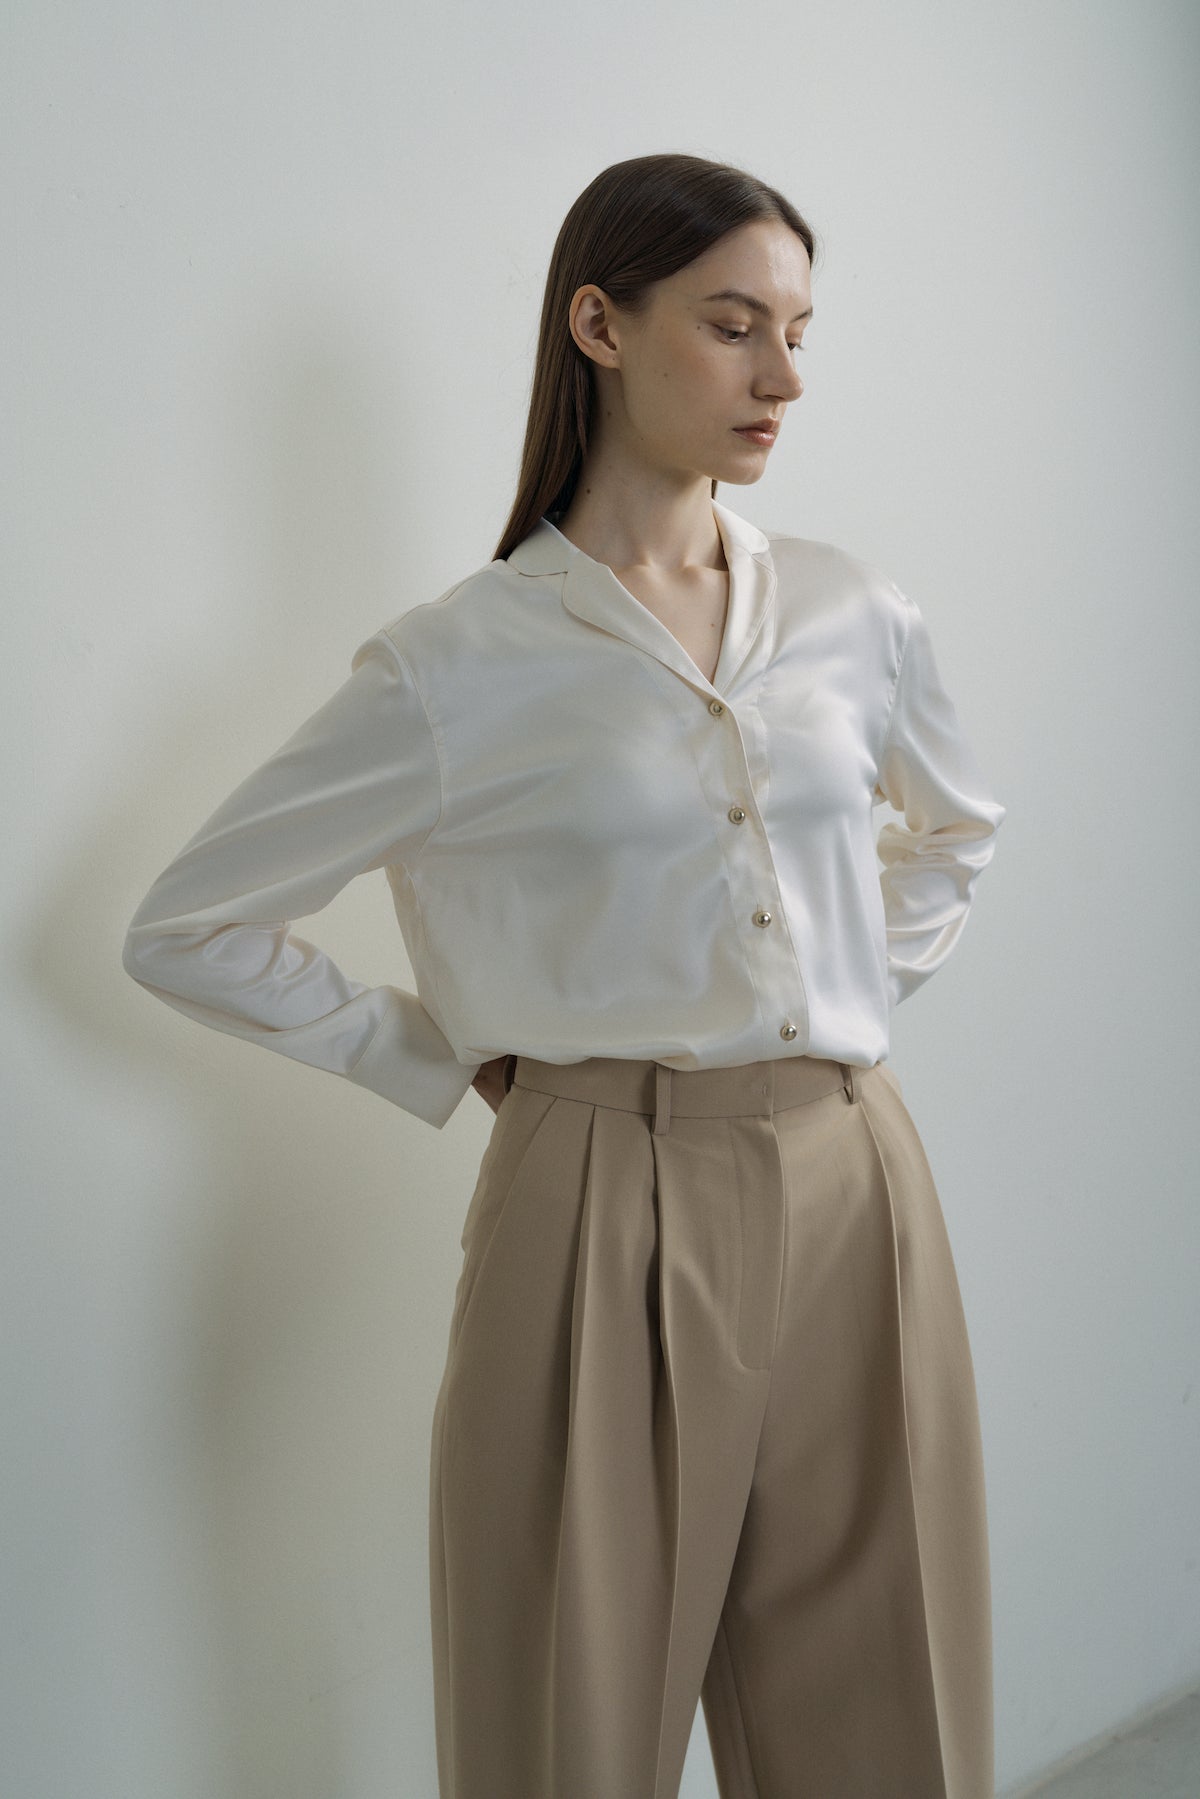 Satin Blouse In Ivory